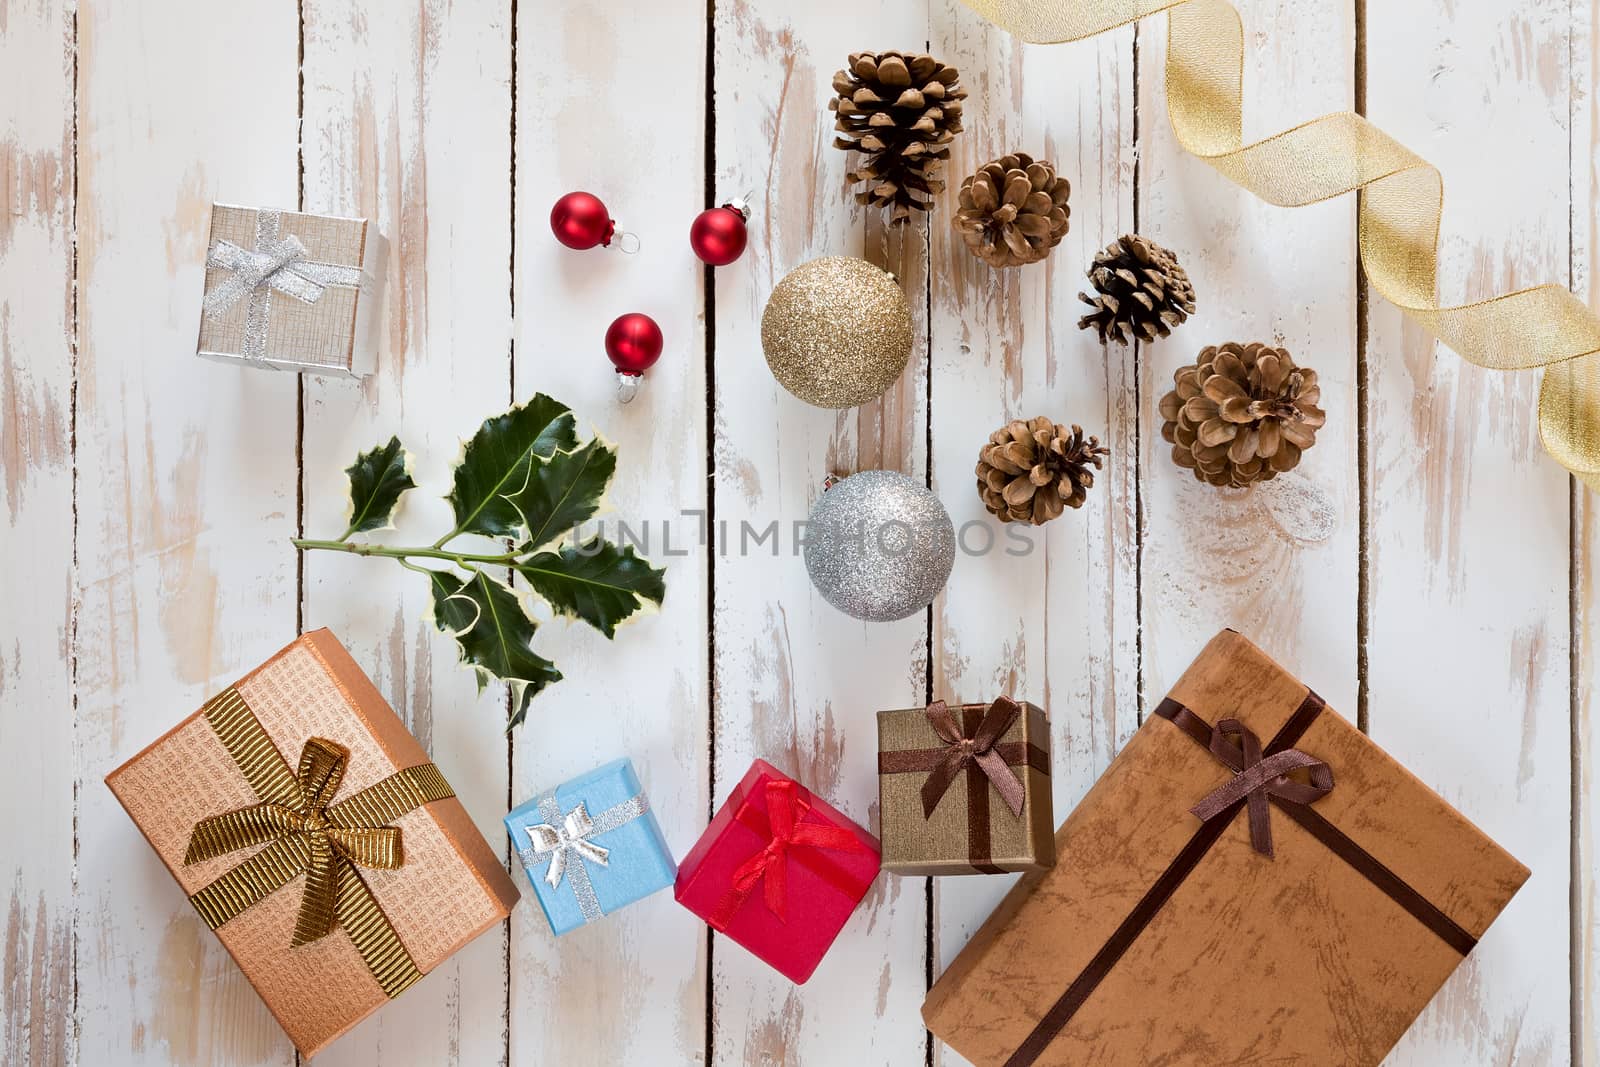 Christmas presents and decorations over a rustic wooden table seen from above